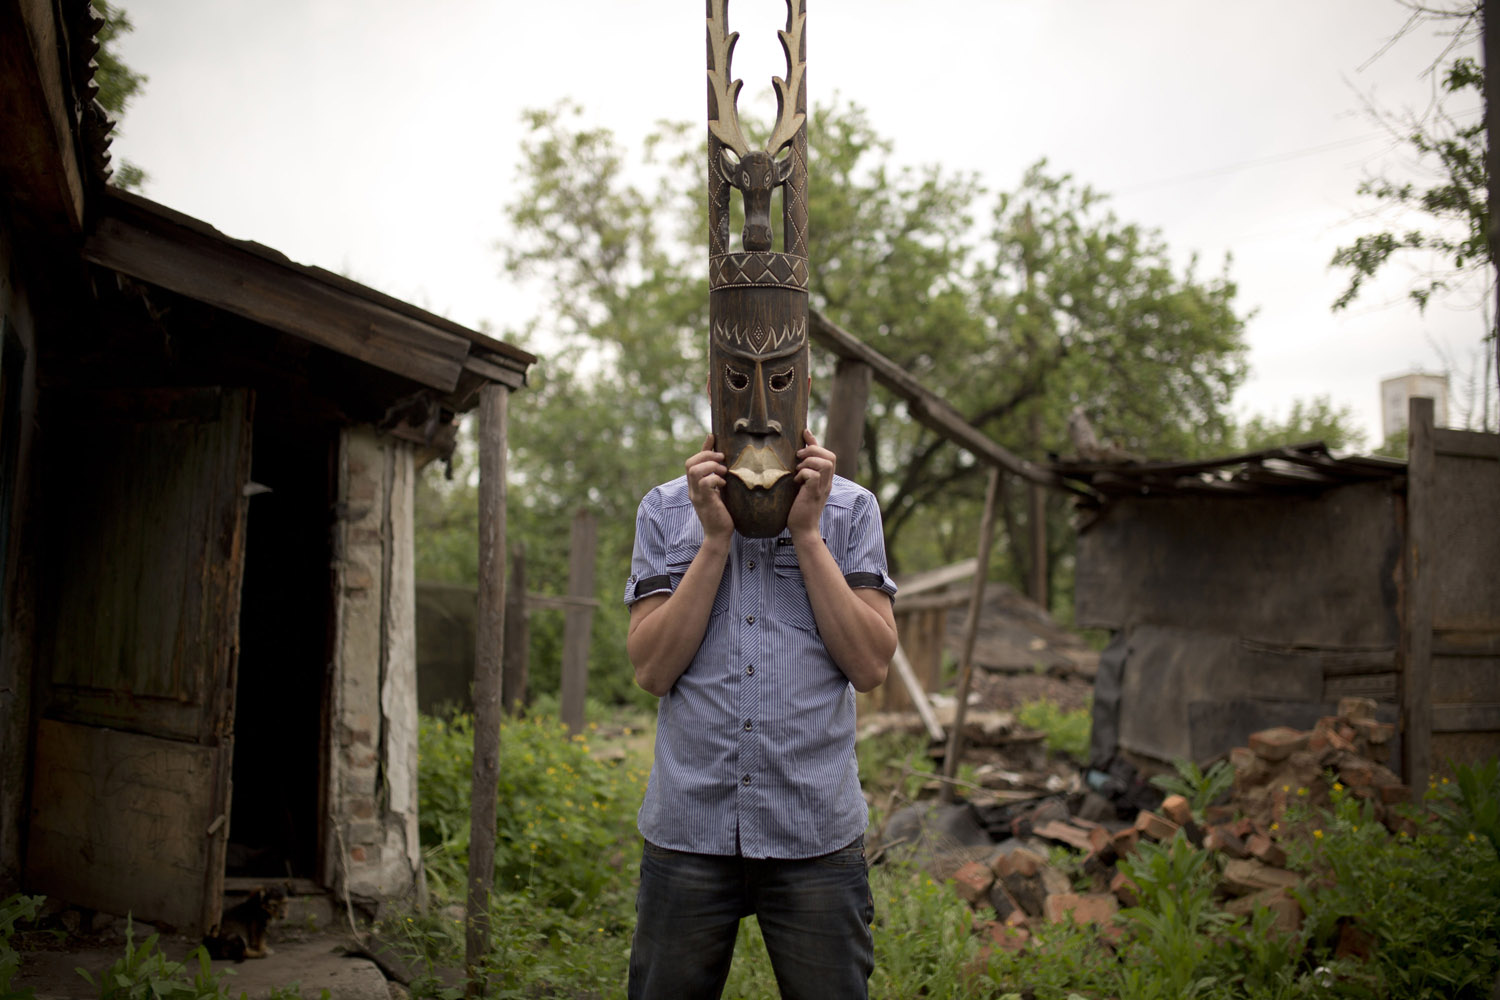 Tolek (23), playing with a mask he carved out of wood. In life he has learned to do many things, including carpentry which is what he would really like to do in life. He isn't too optimistic about it: without money or anybody to help, becoming a carpenter will most likely remain a distant dream, as will the dreams of many other young miners of the Donbass.